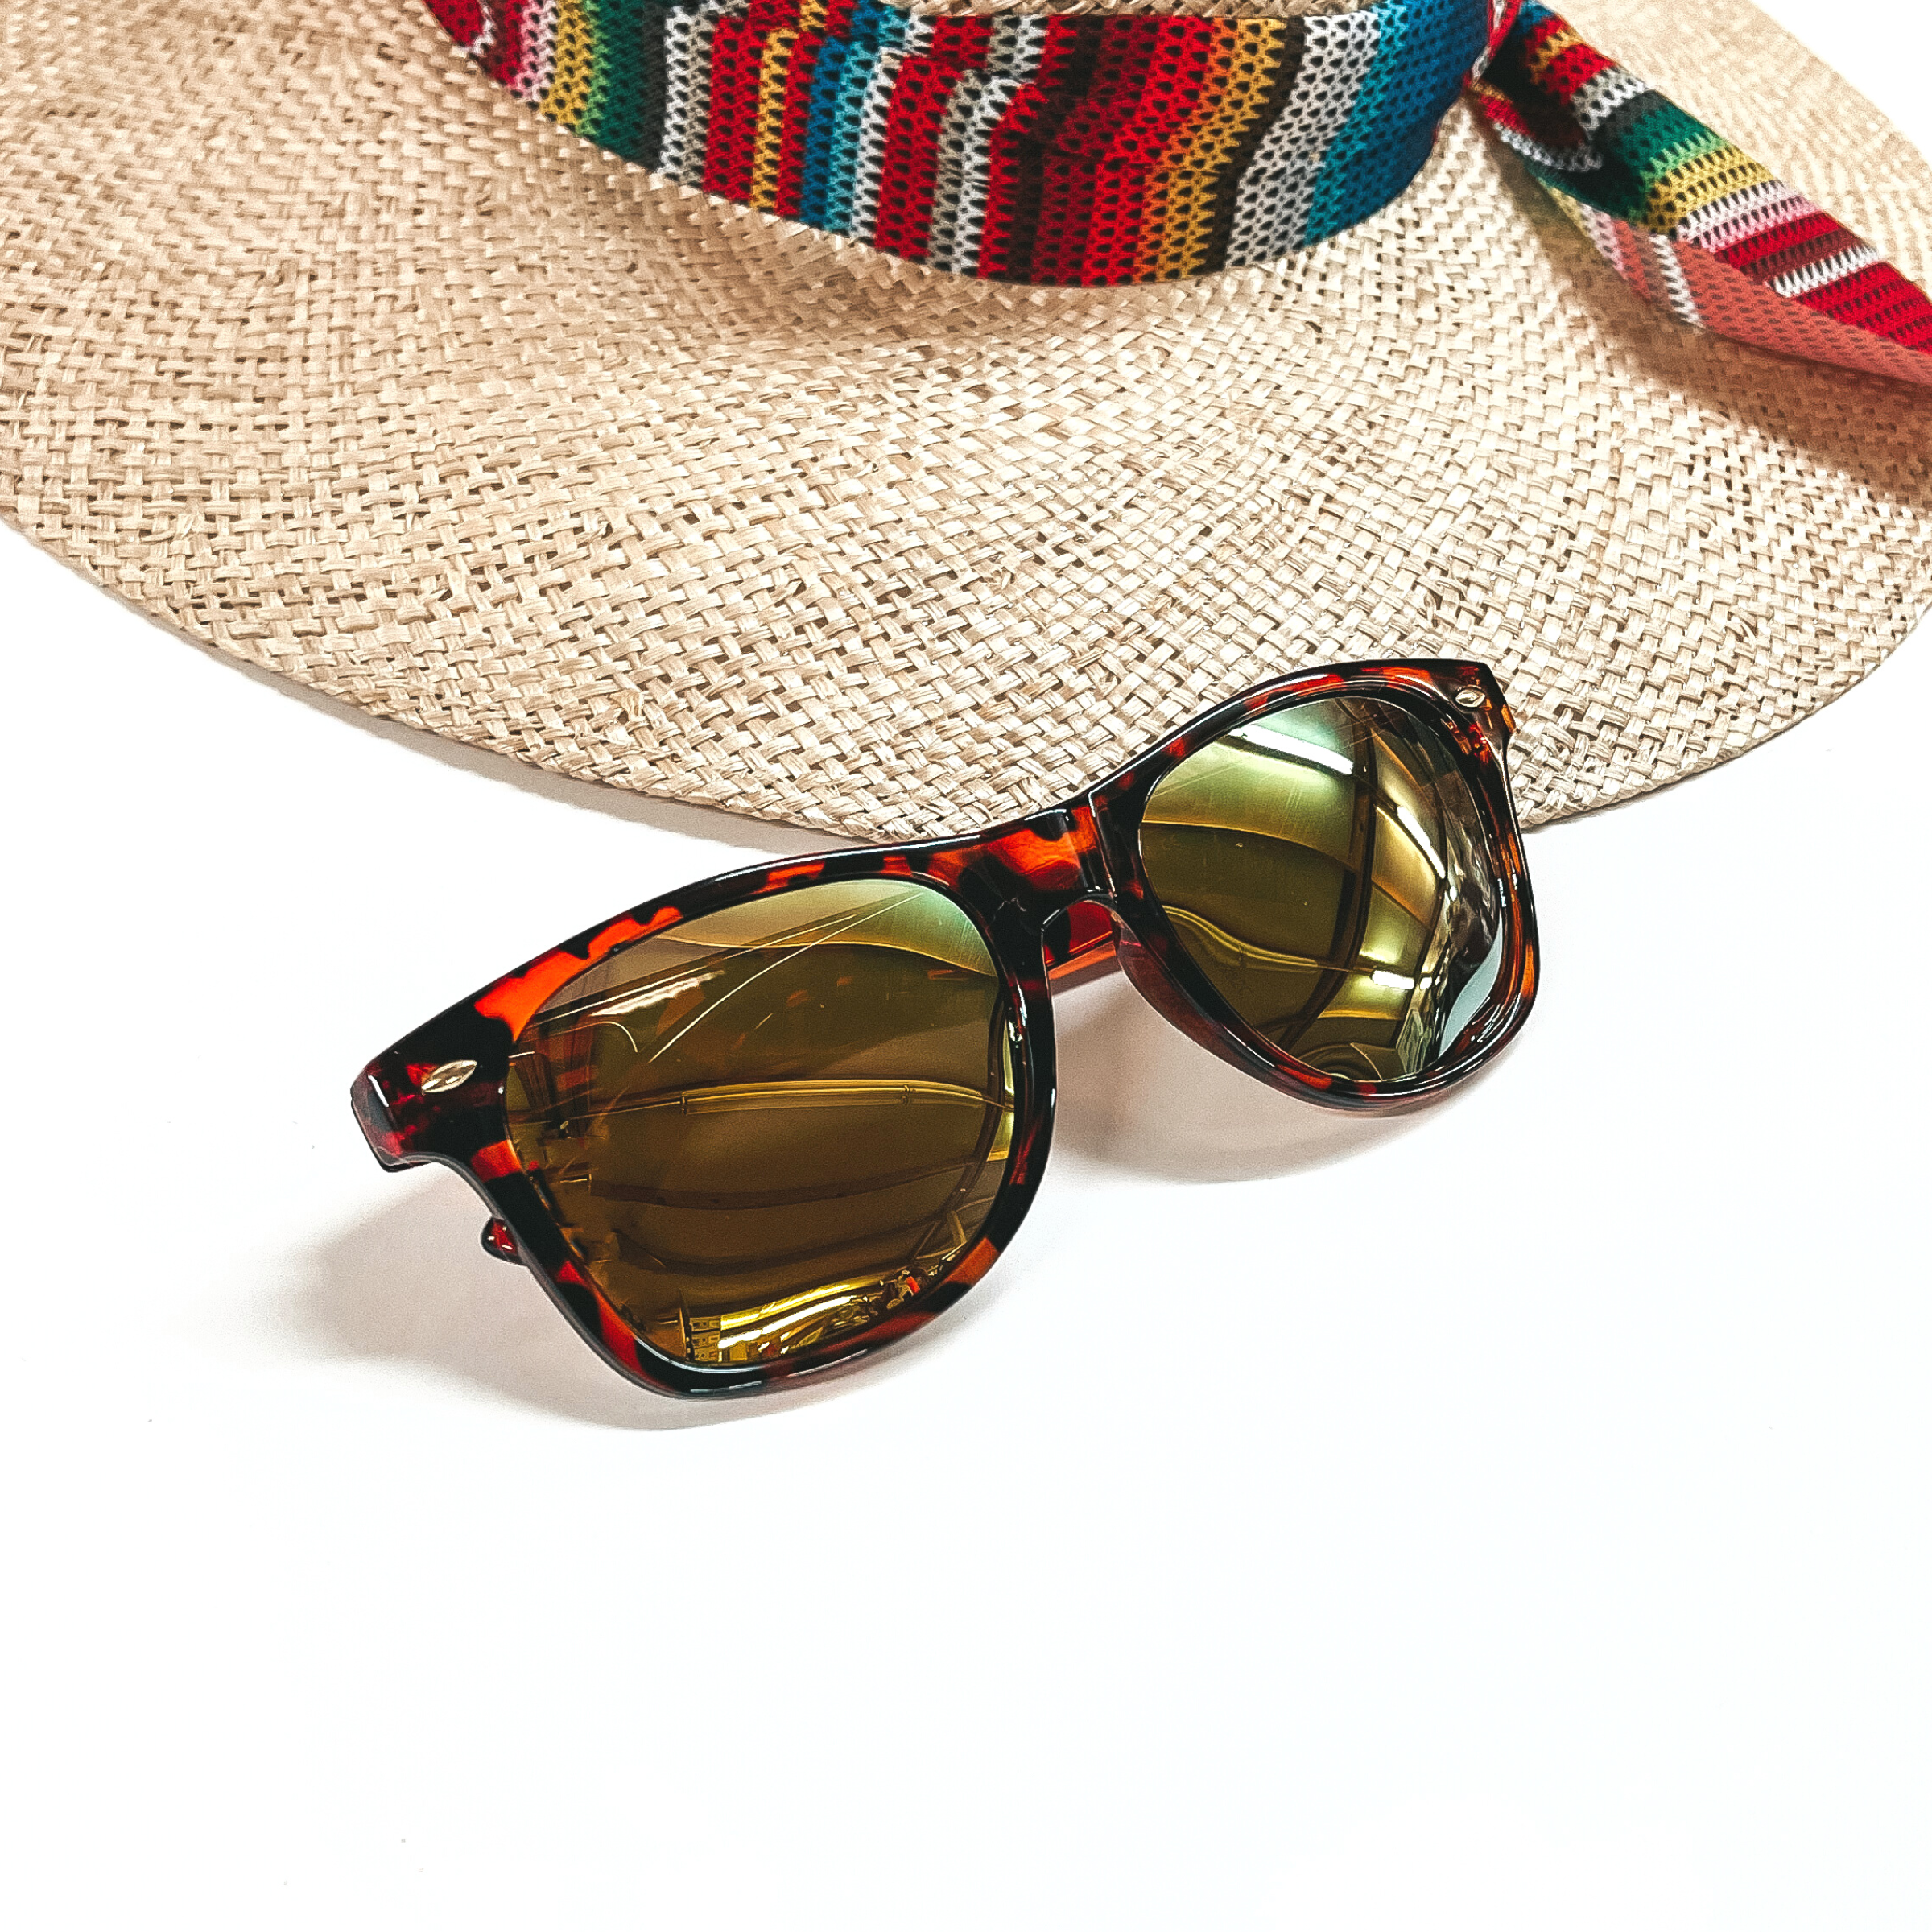 These are tortouise print frames with a yellow/green lense and silver detailing. These sunglasses are placed on a white background and a straw hat with a colorful hat band in the back as decor.